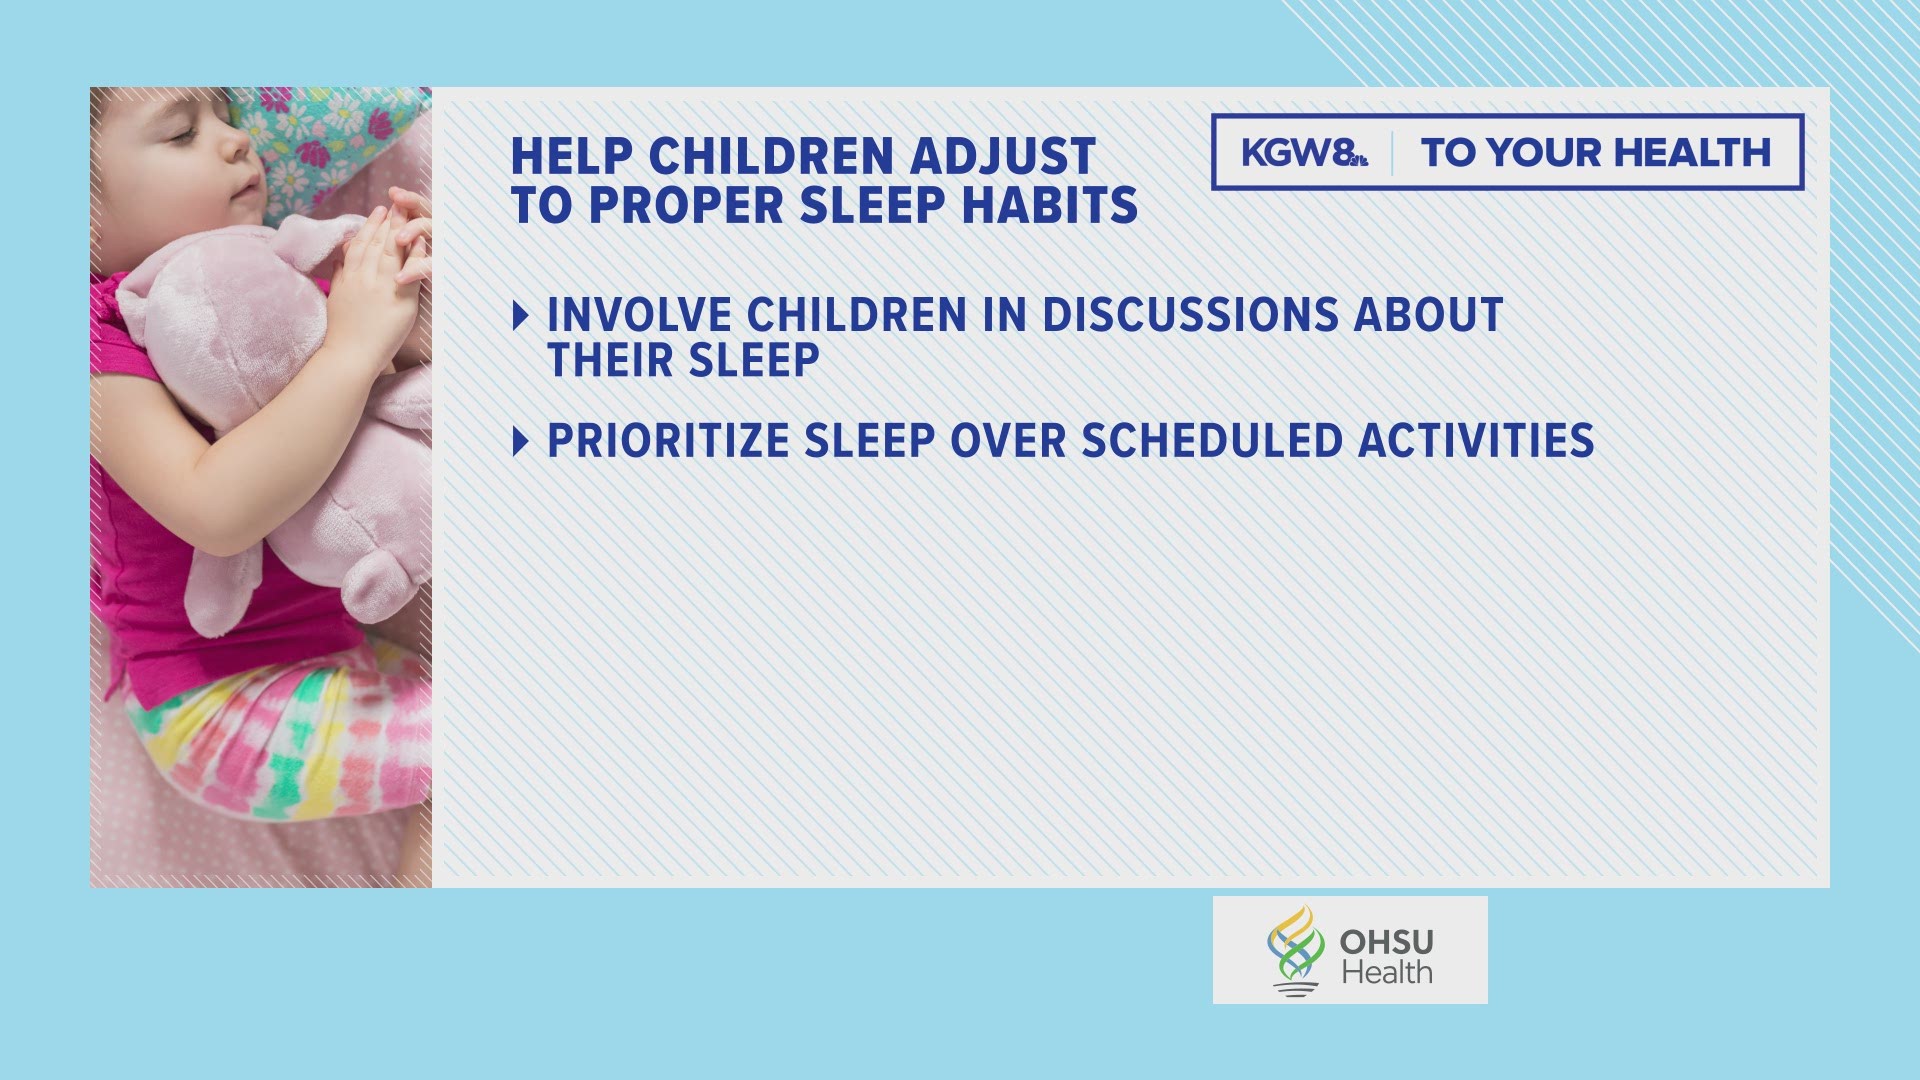 From OHSU Health, here are five tips to help children adjust to proper sleep habits.